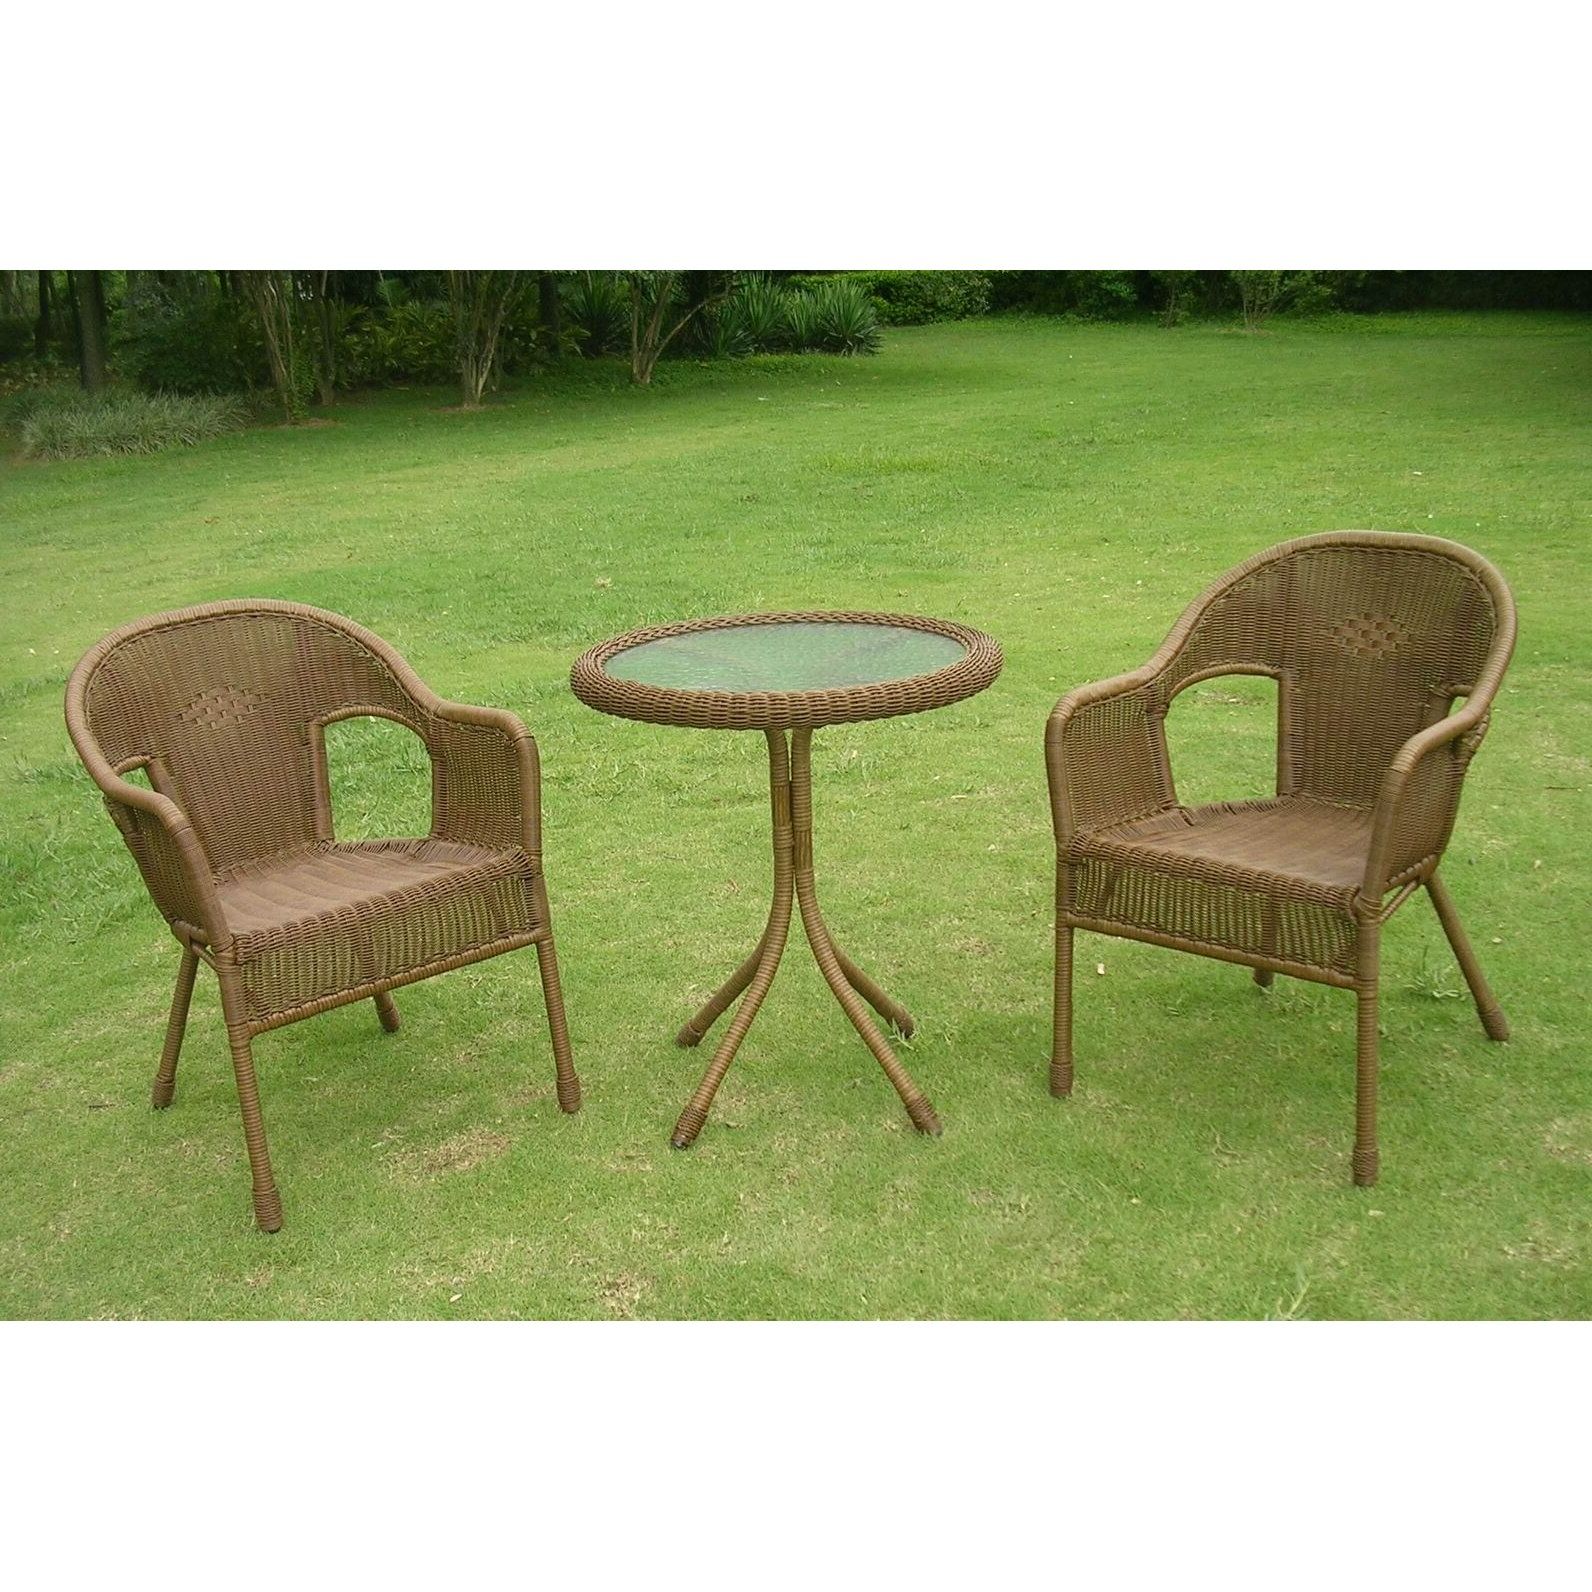 Wayfair For 3 Piece Patio Bistro Sets (View 11 of 15)